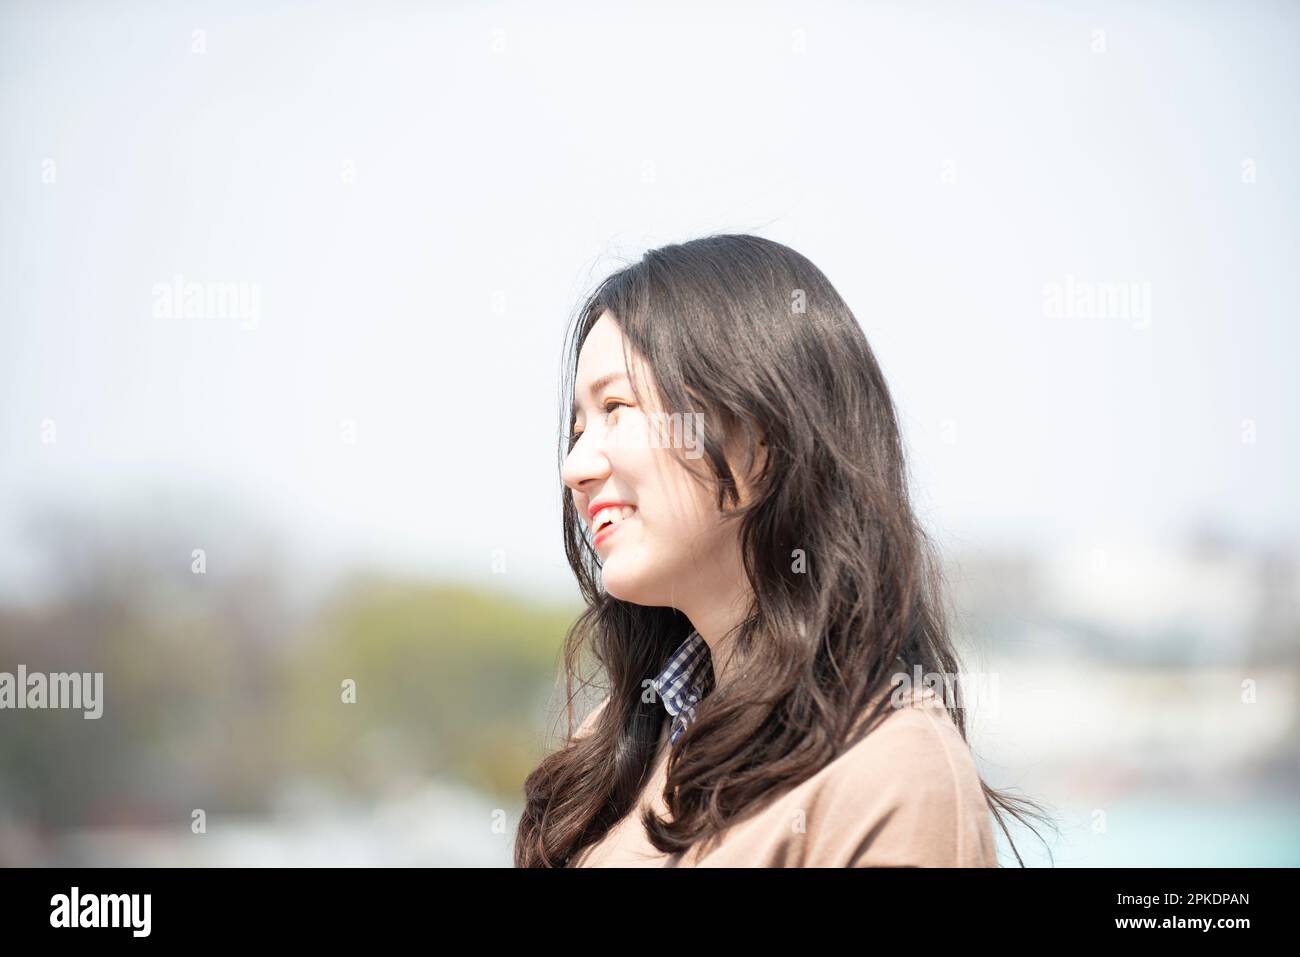 Woman laughing on rooftop Stock Photo